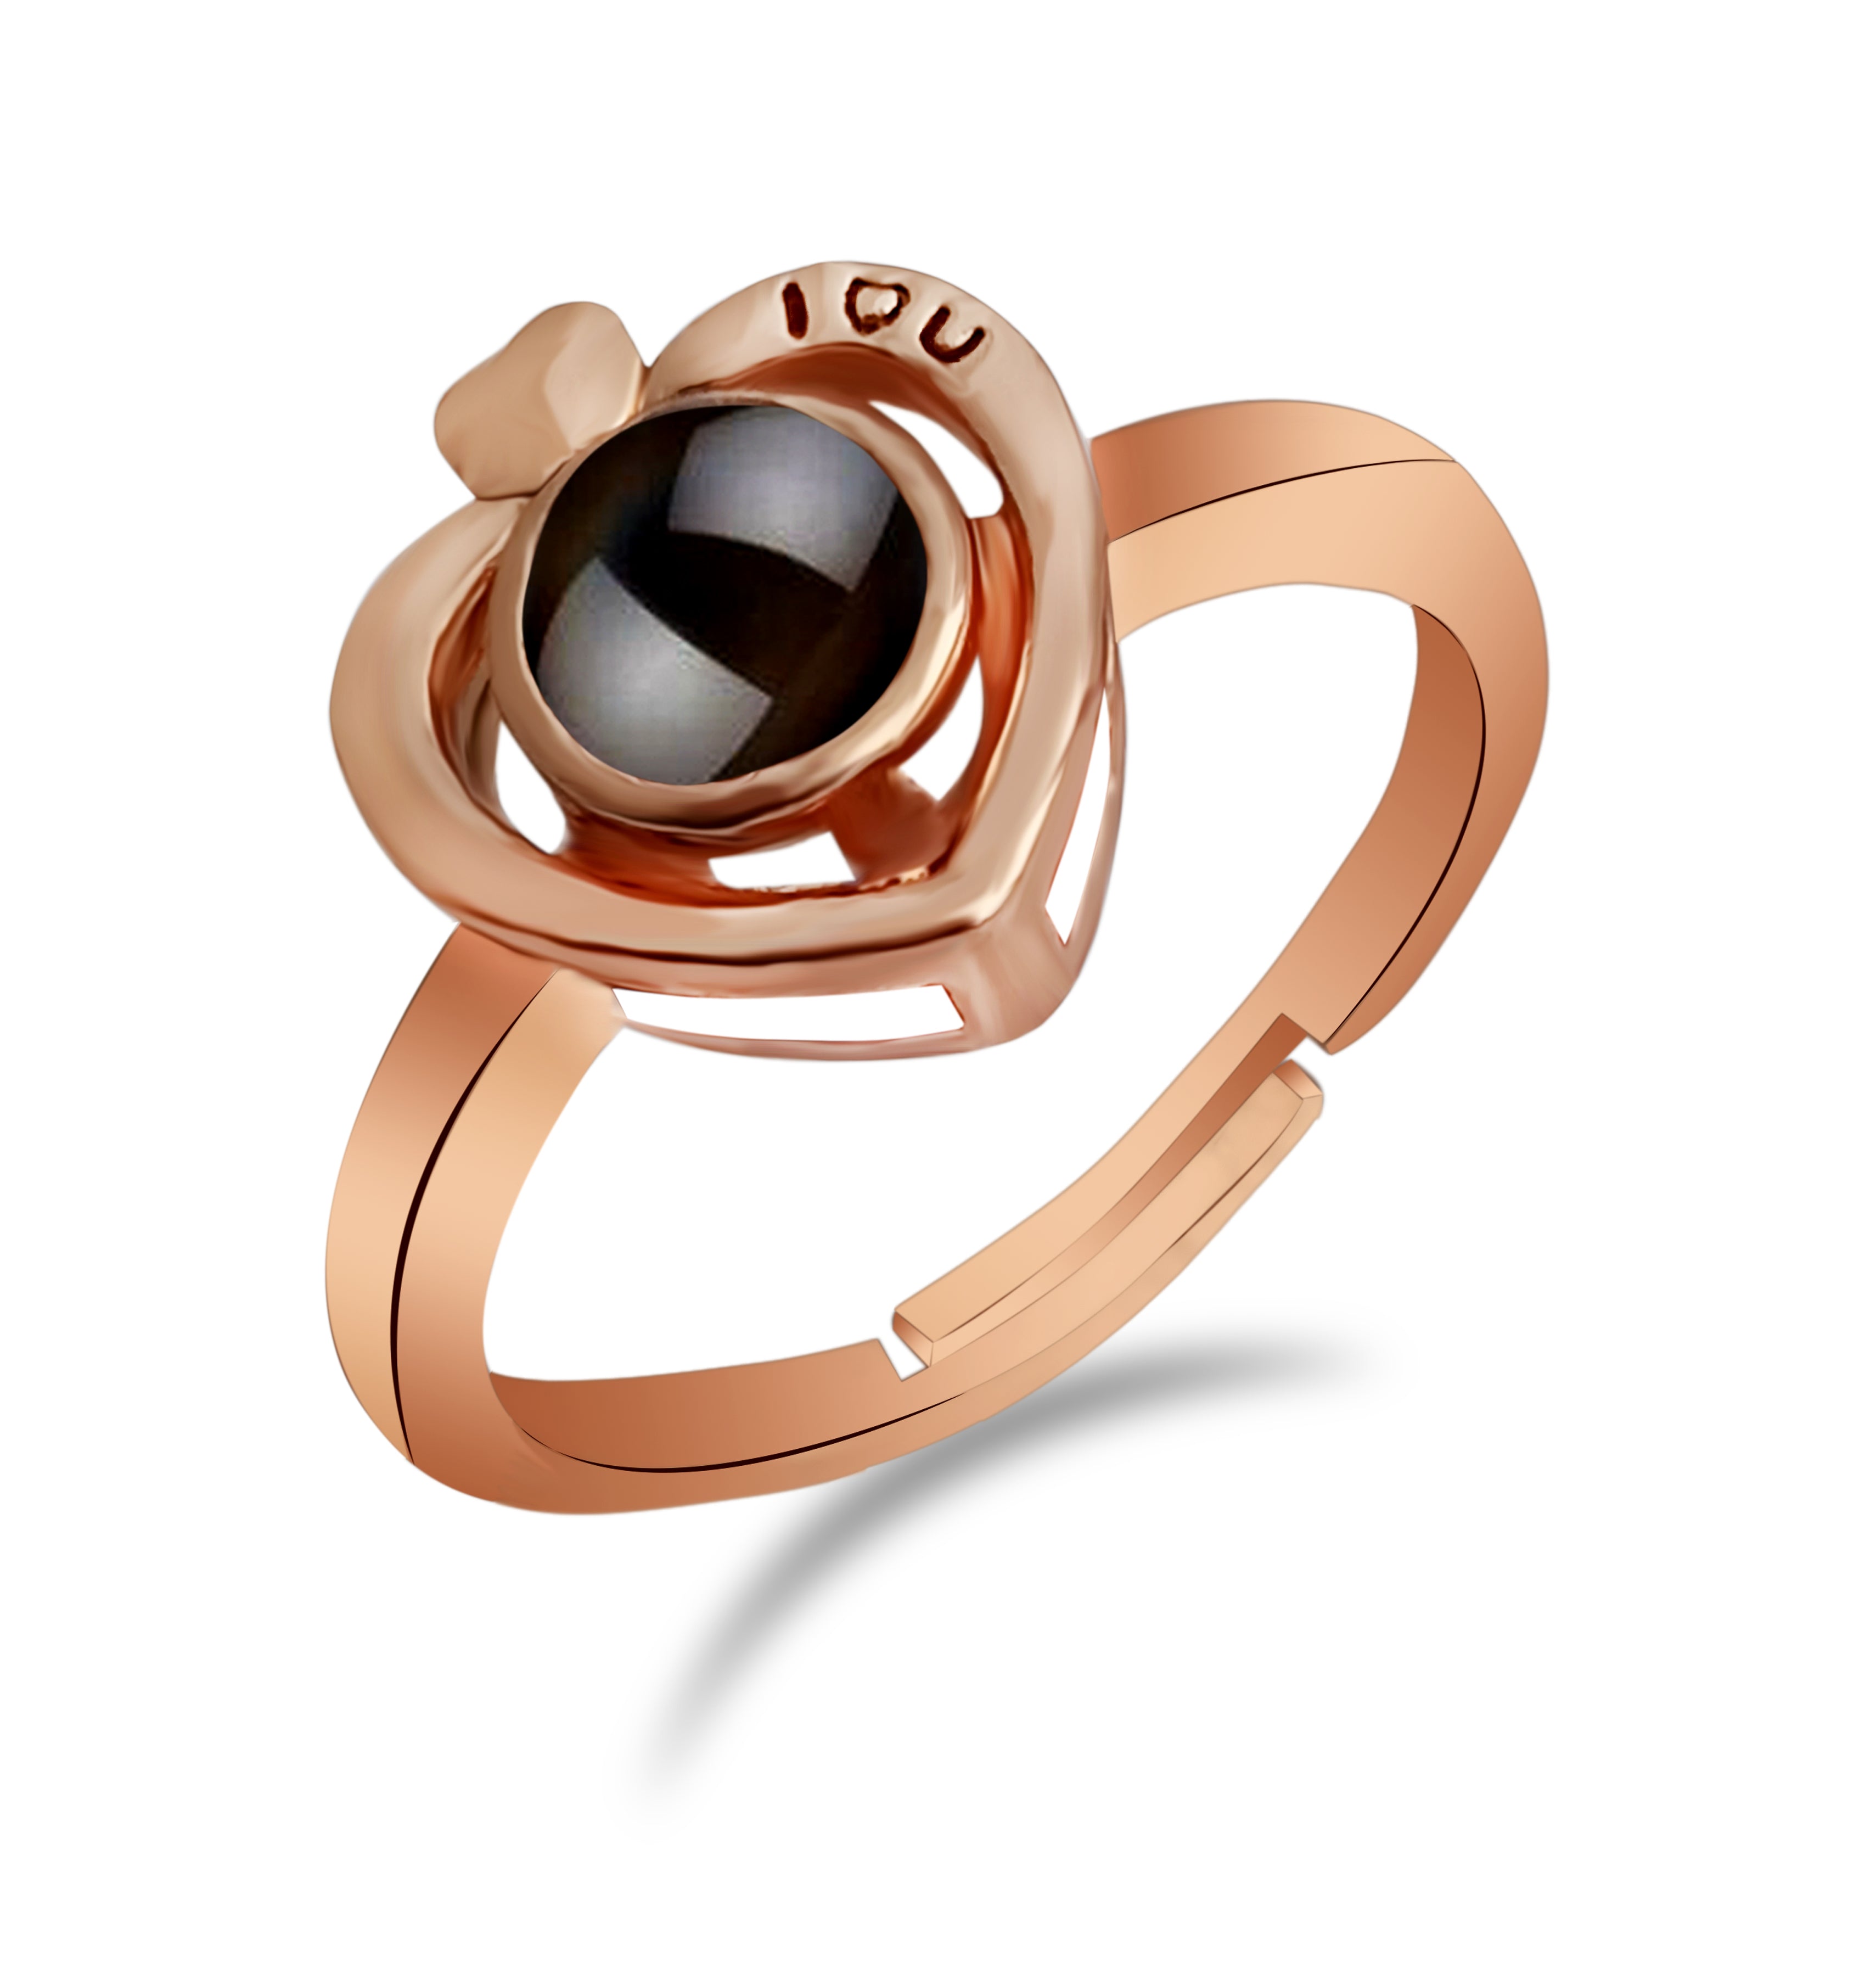 Urbana Heart Shaped Copper Plated single Adjustable Ring Reflecting I love you In 100 Languages